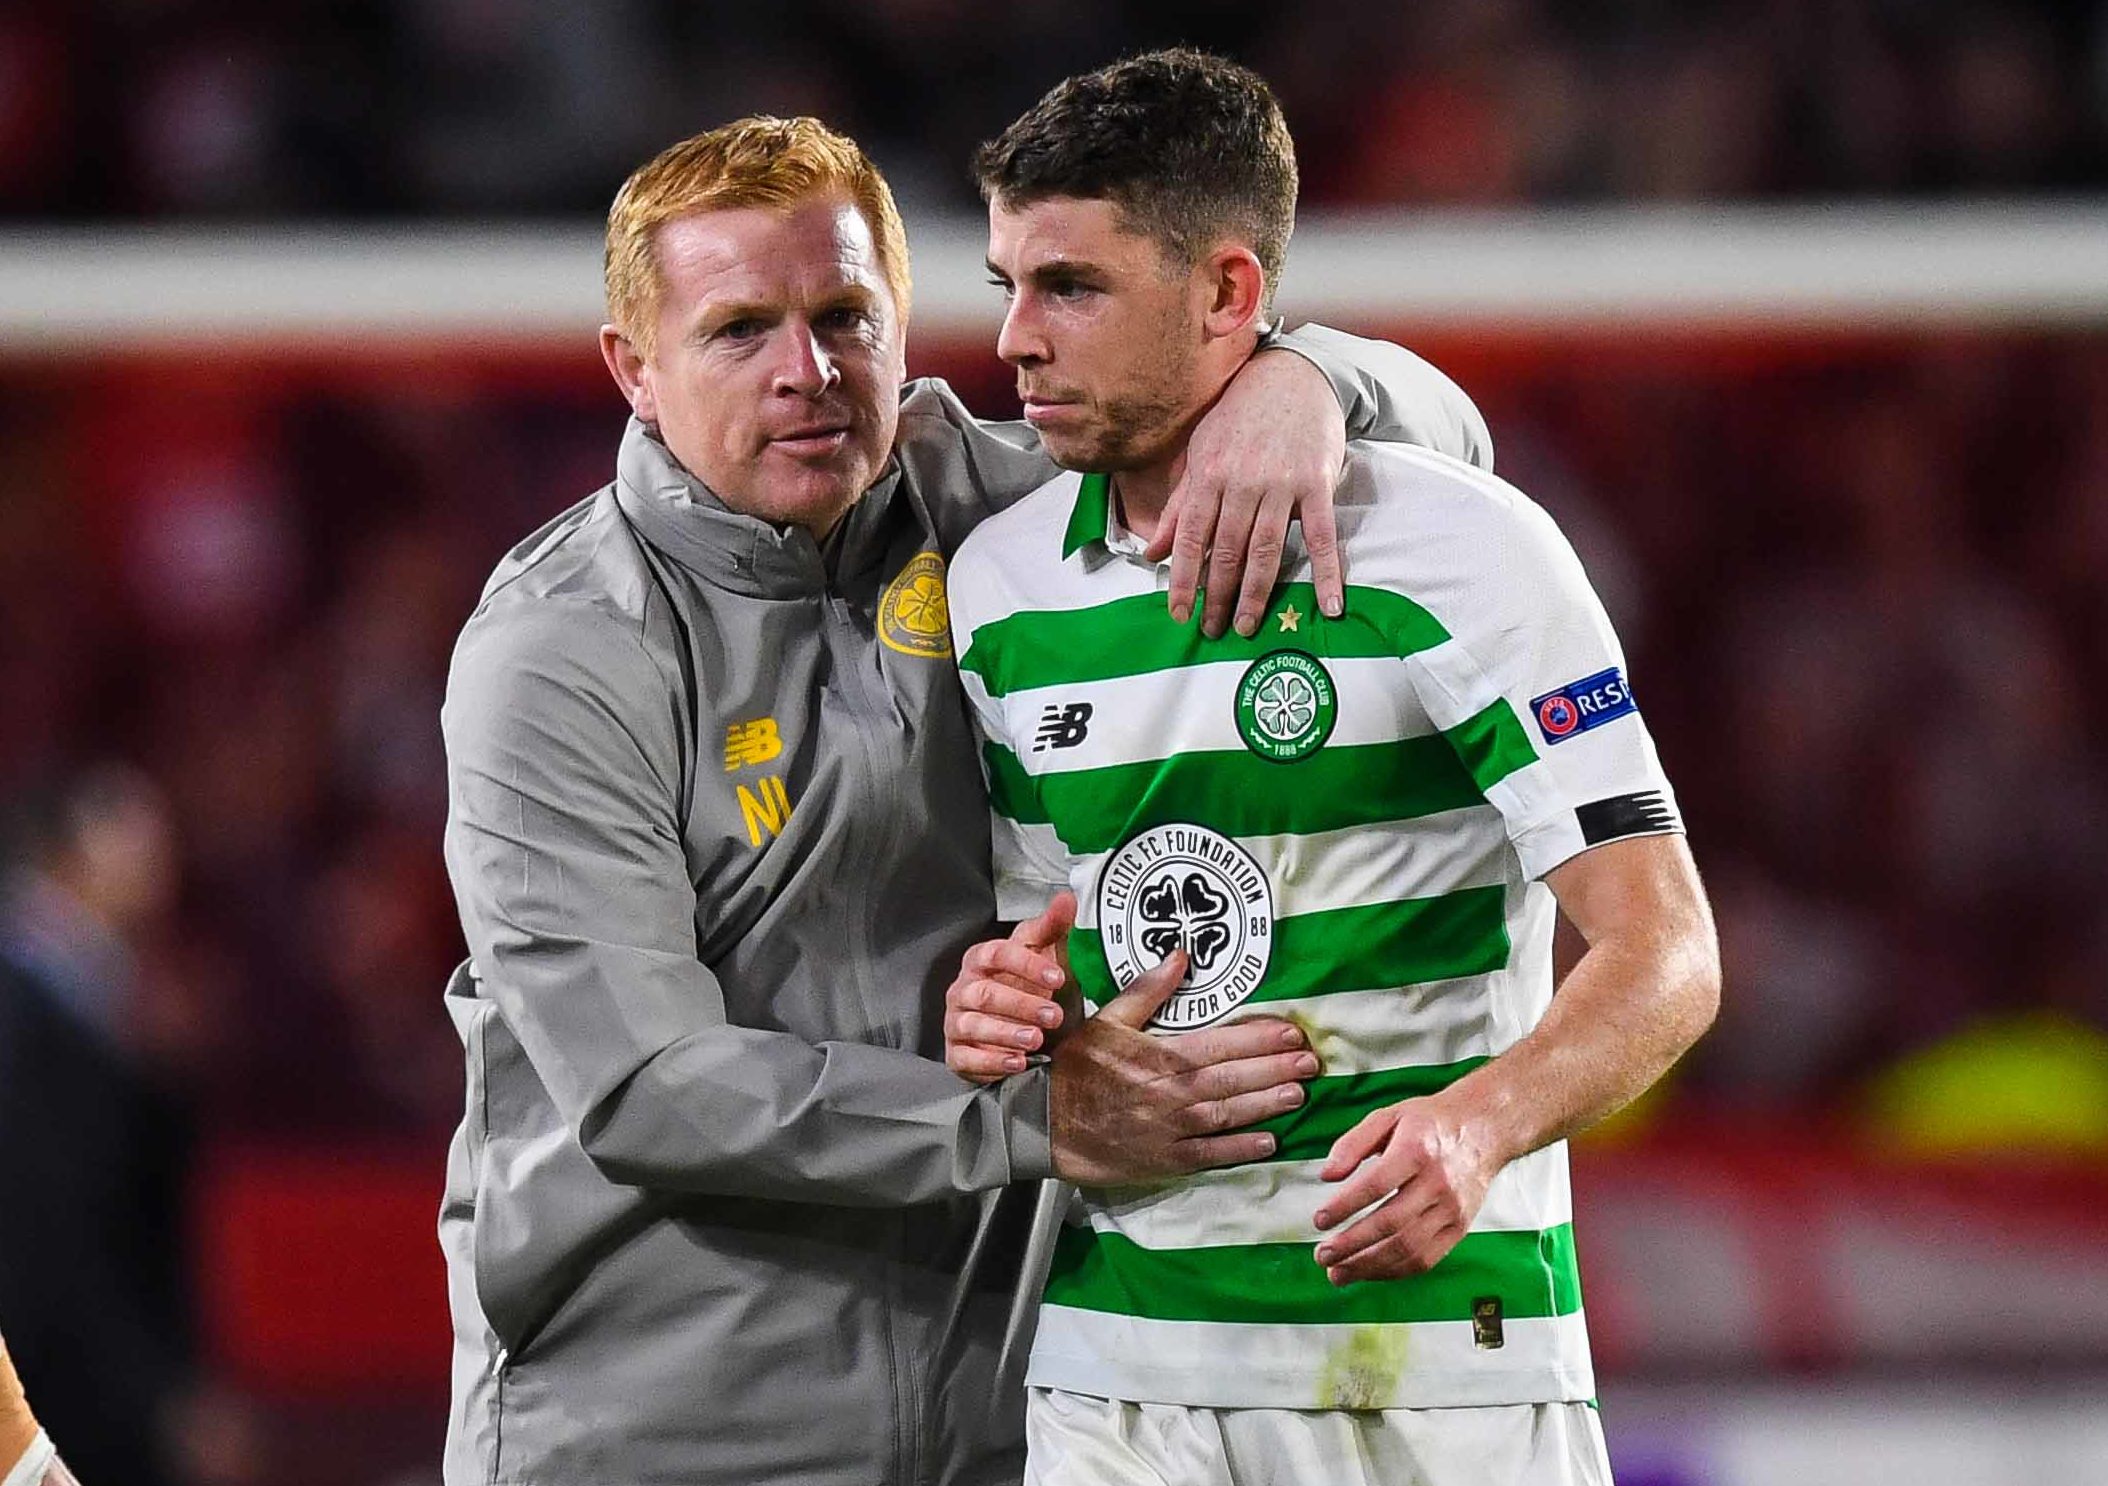 Celtic's Ryan Christie (R) and manager Neil Lennon at full-time of the UEFA Europa League Group E match between Stade Rennais and Celtic at Roazhon Park, on September 19, in Rennes, France